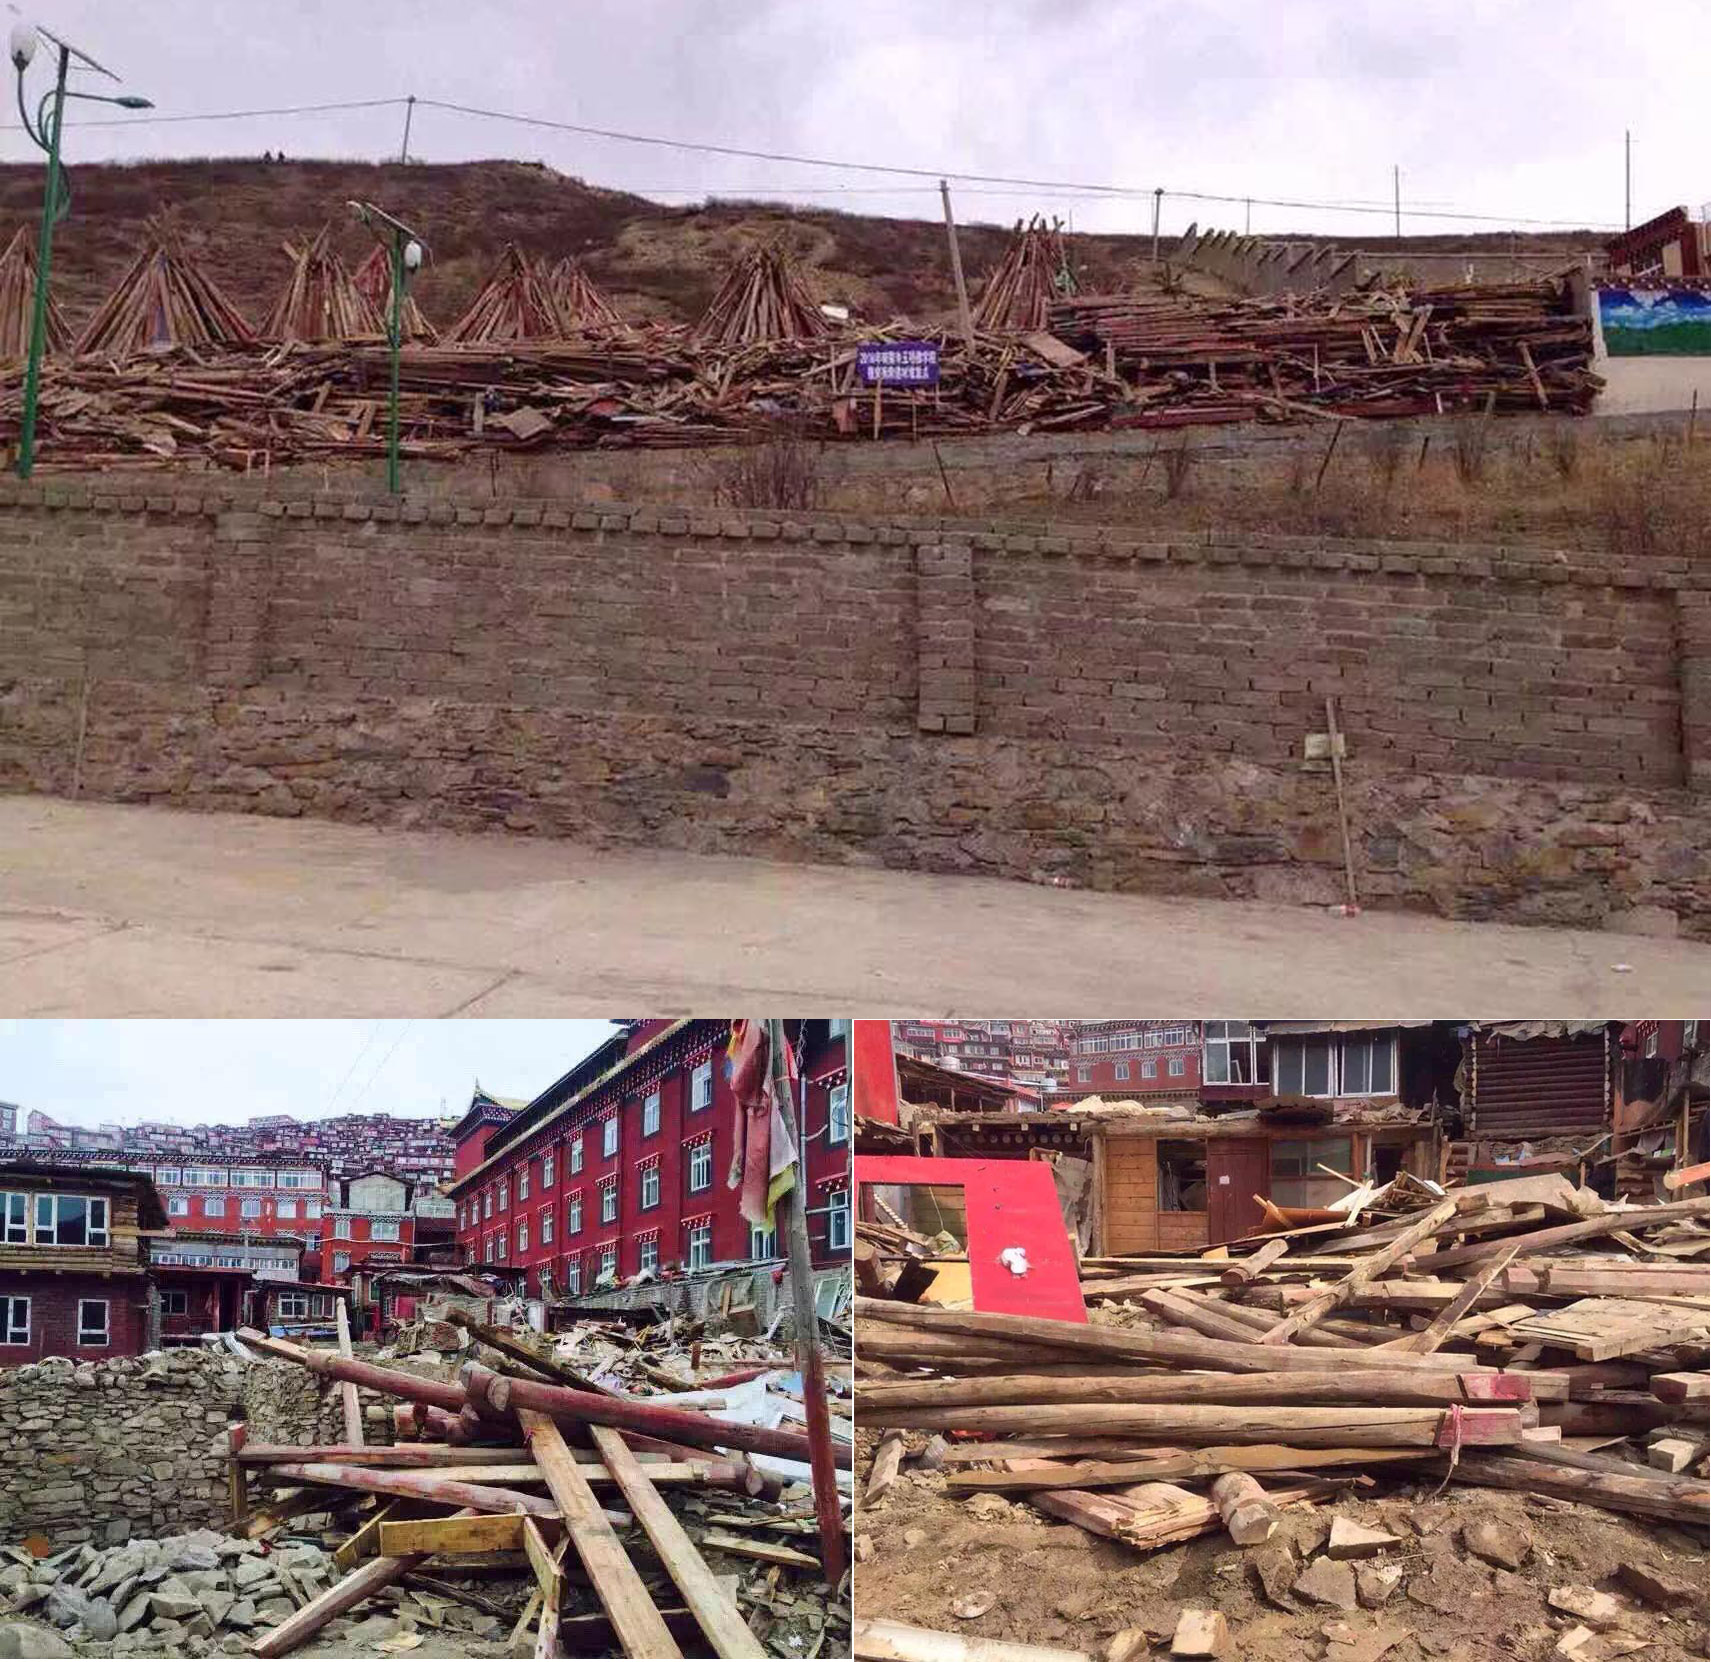 Photos circulated on social media show advance dismantling of dwellings before the arrival of government demolition crew at Larung Gar